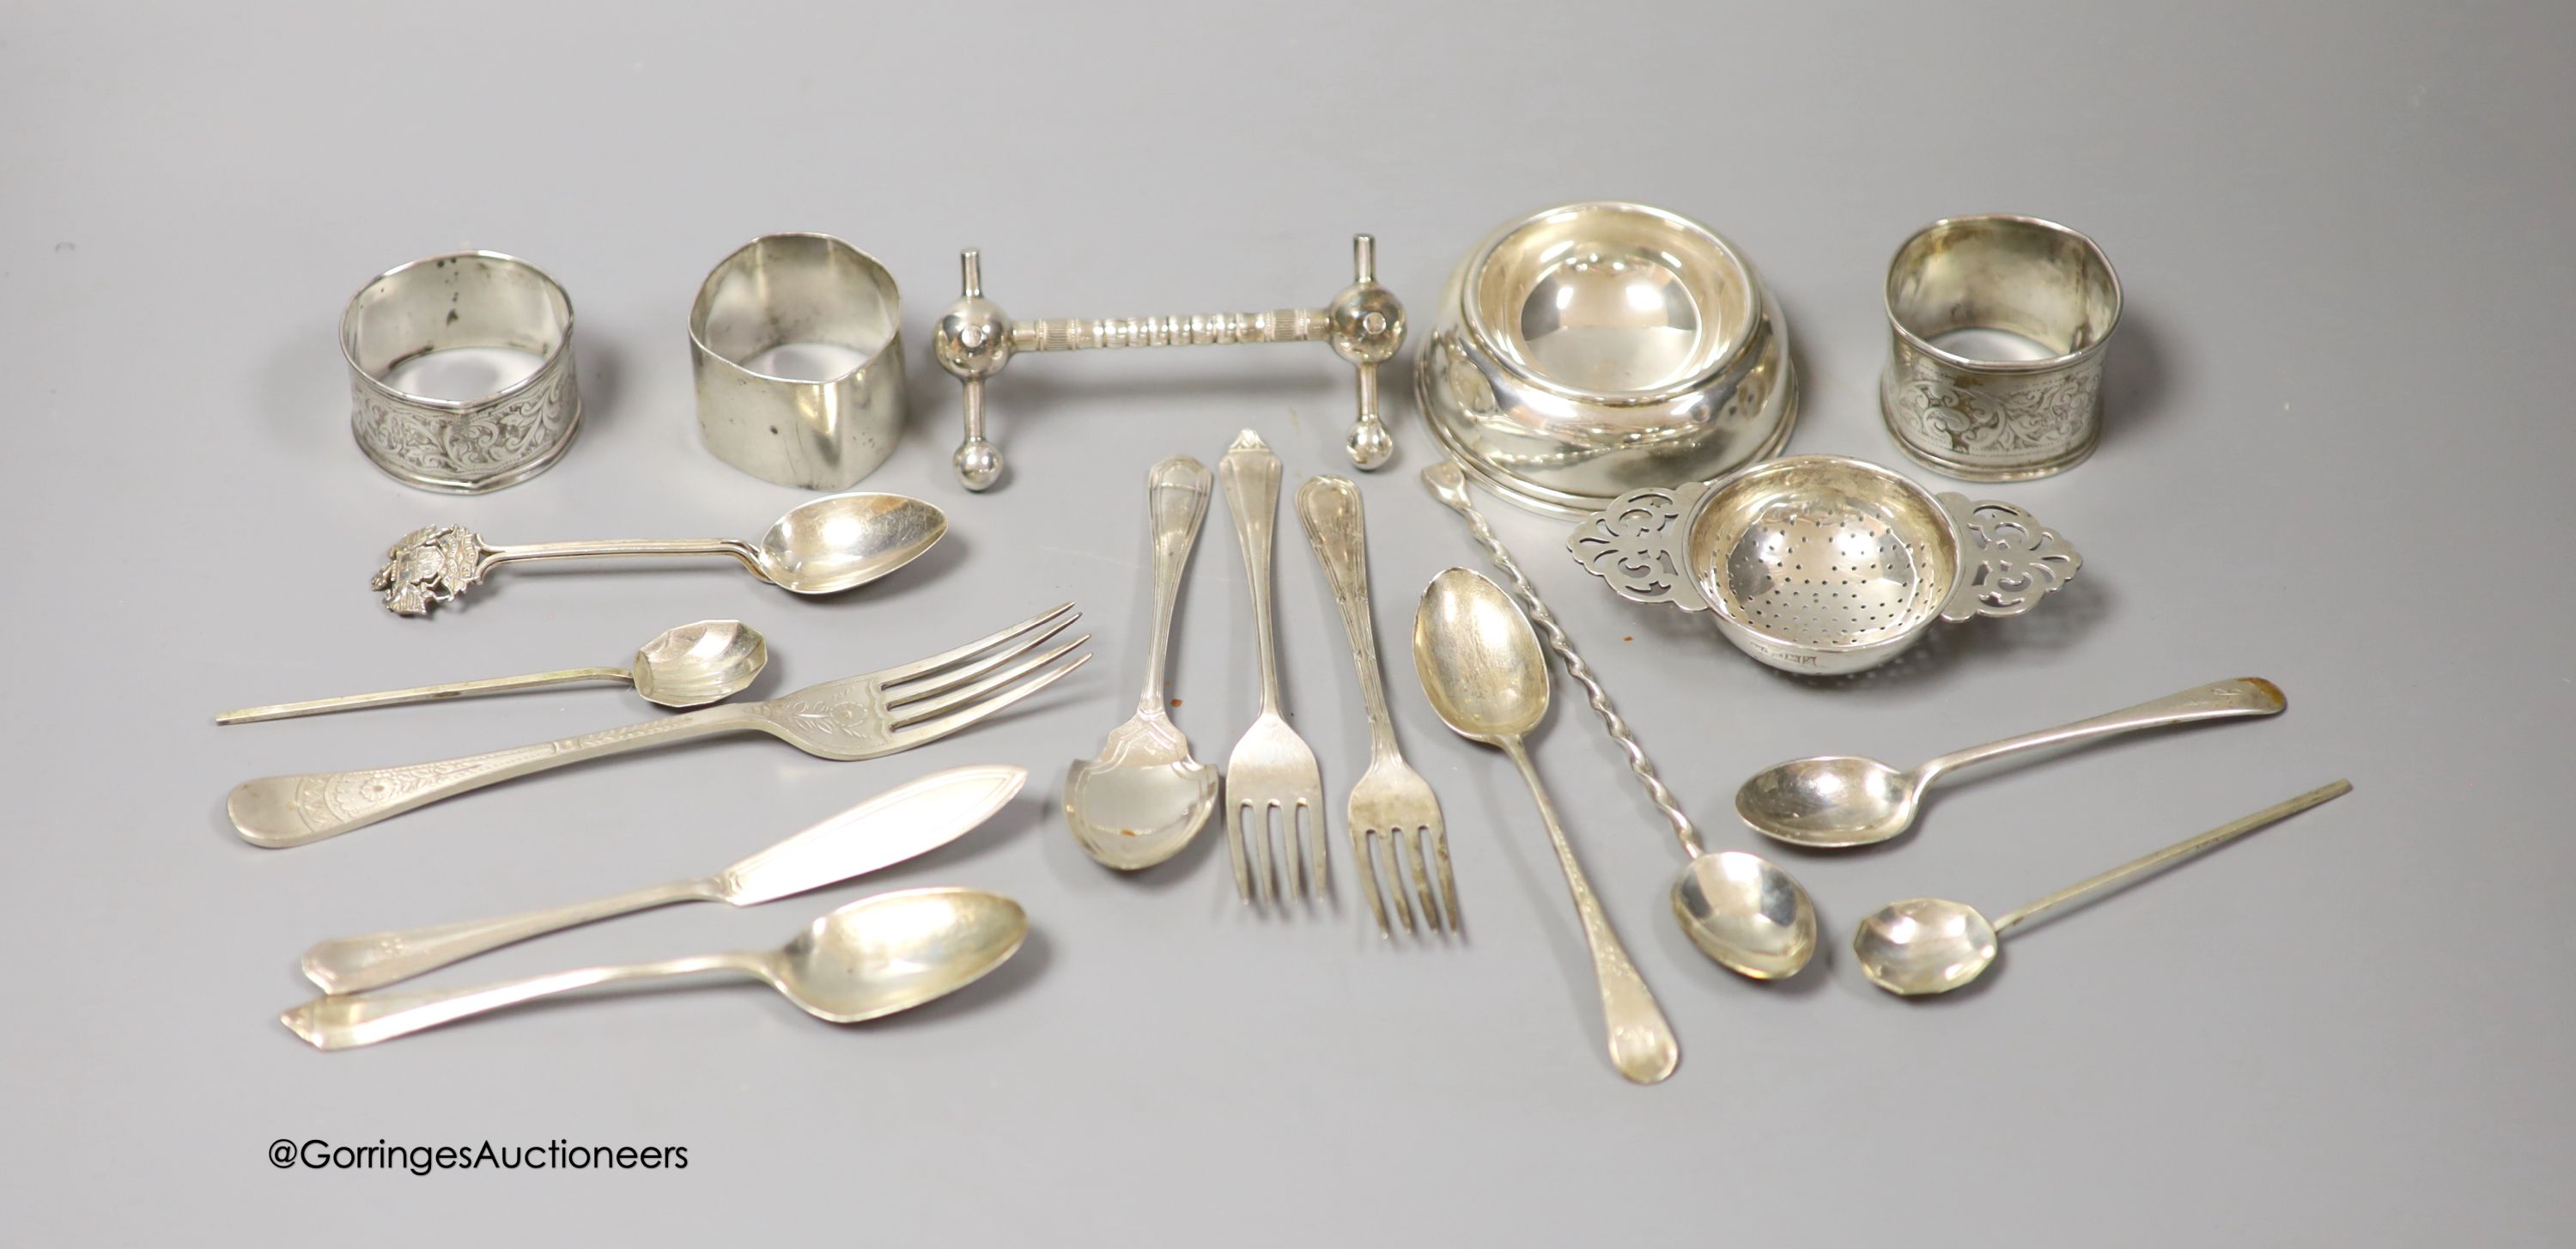 Minor small silver including teaspoons, butter knife, napkin rings etc. and four silver plated items